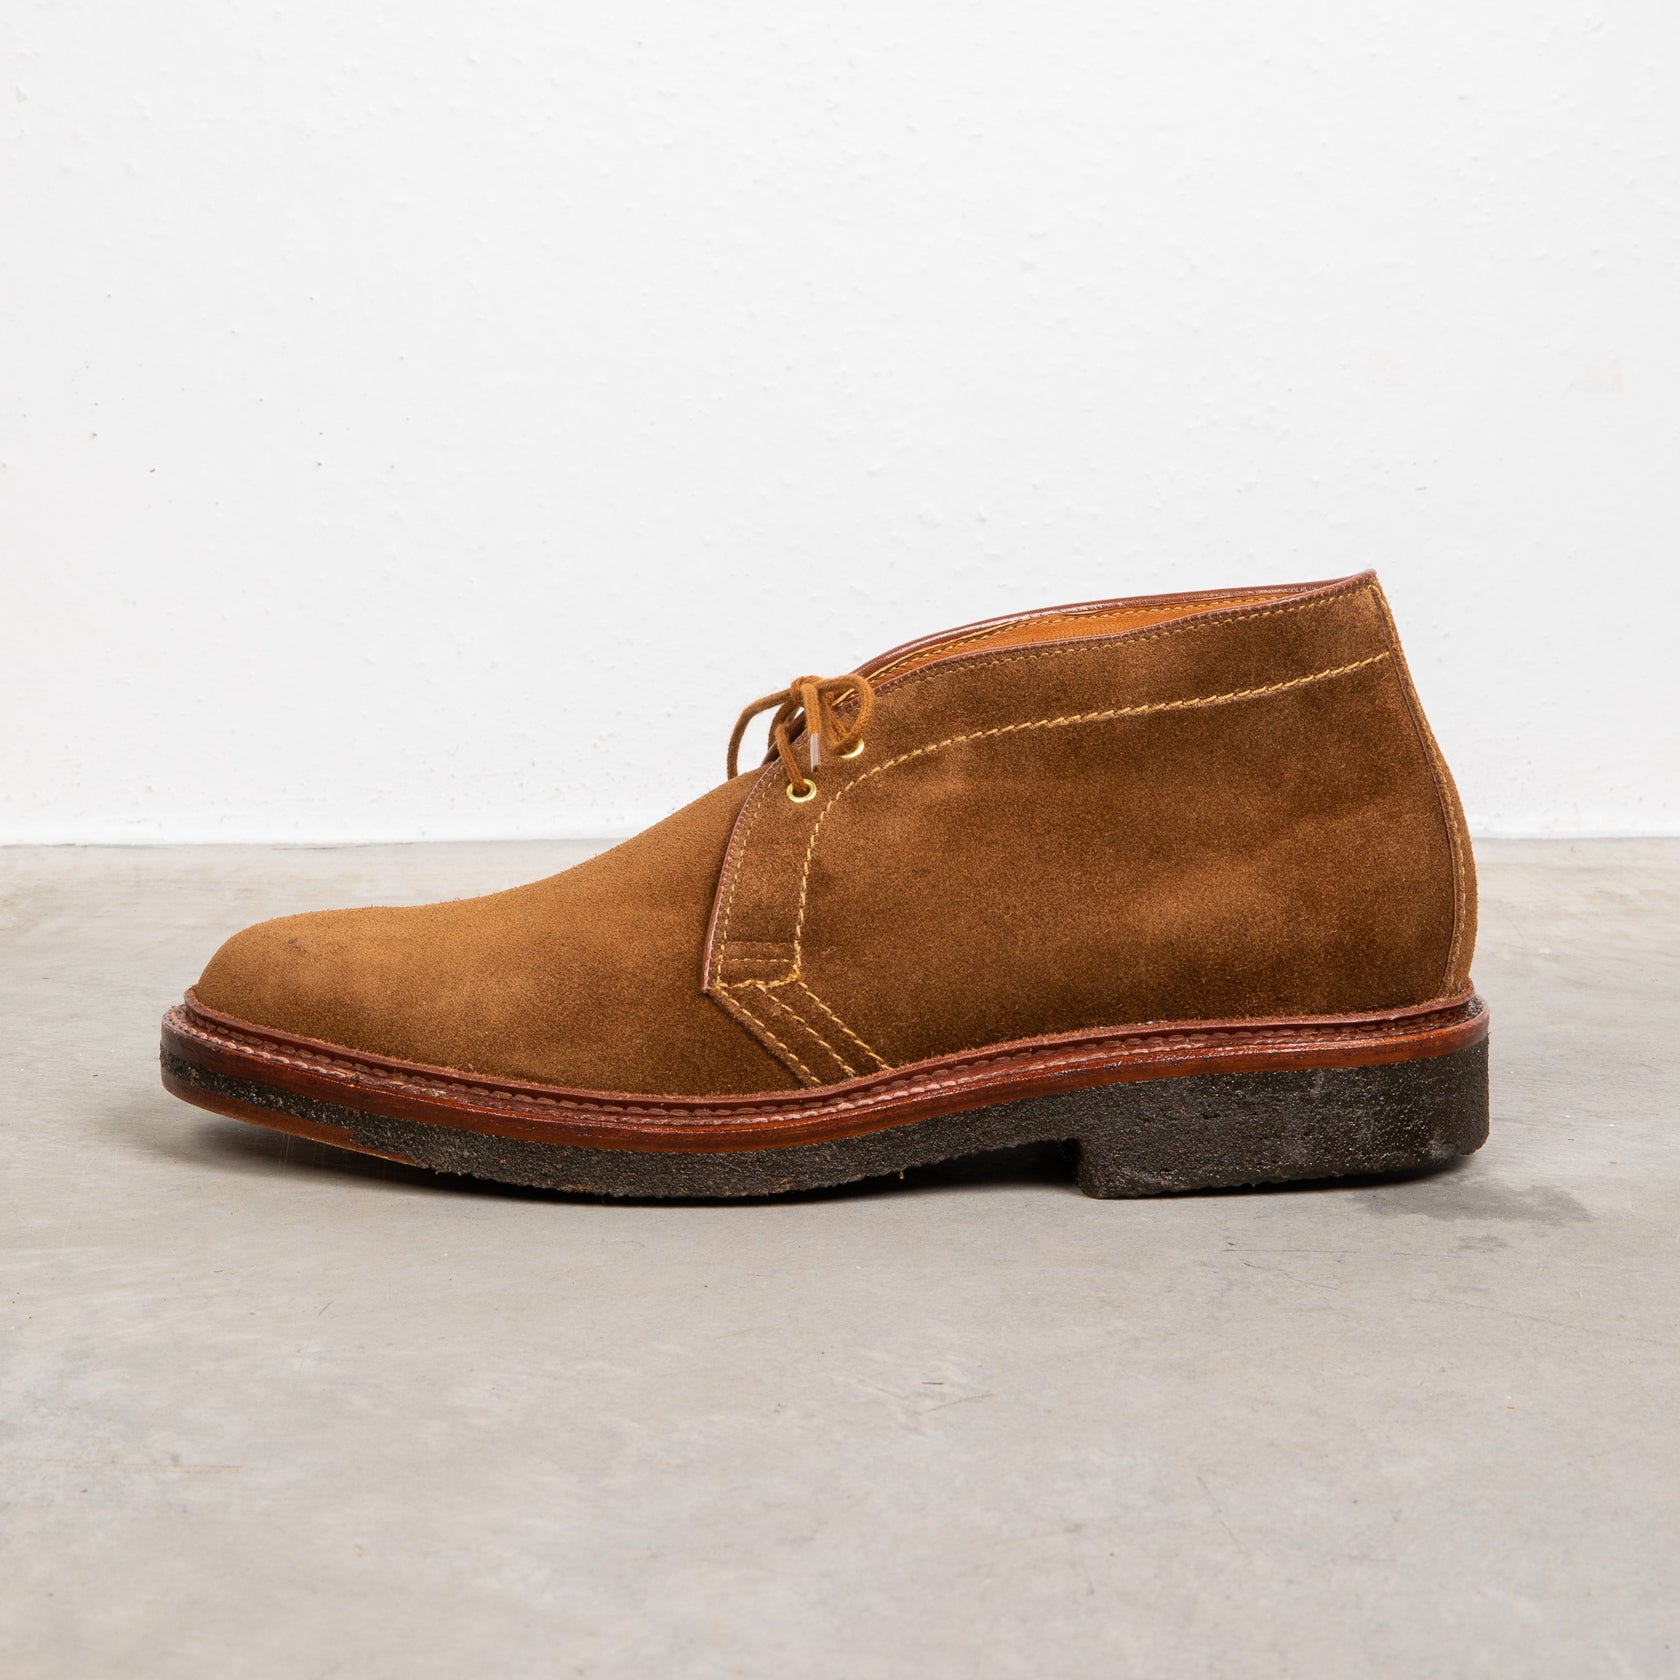 Alden x Frans Boone Chukka Snuff Suede on Crepe Sole – Frans Boone Store